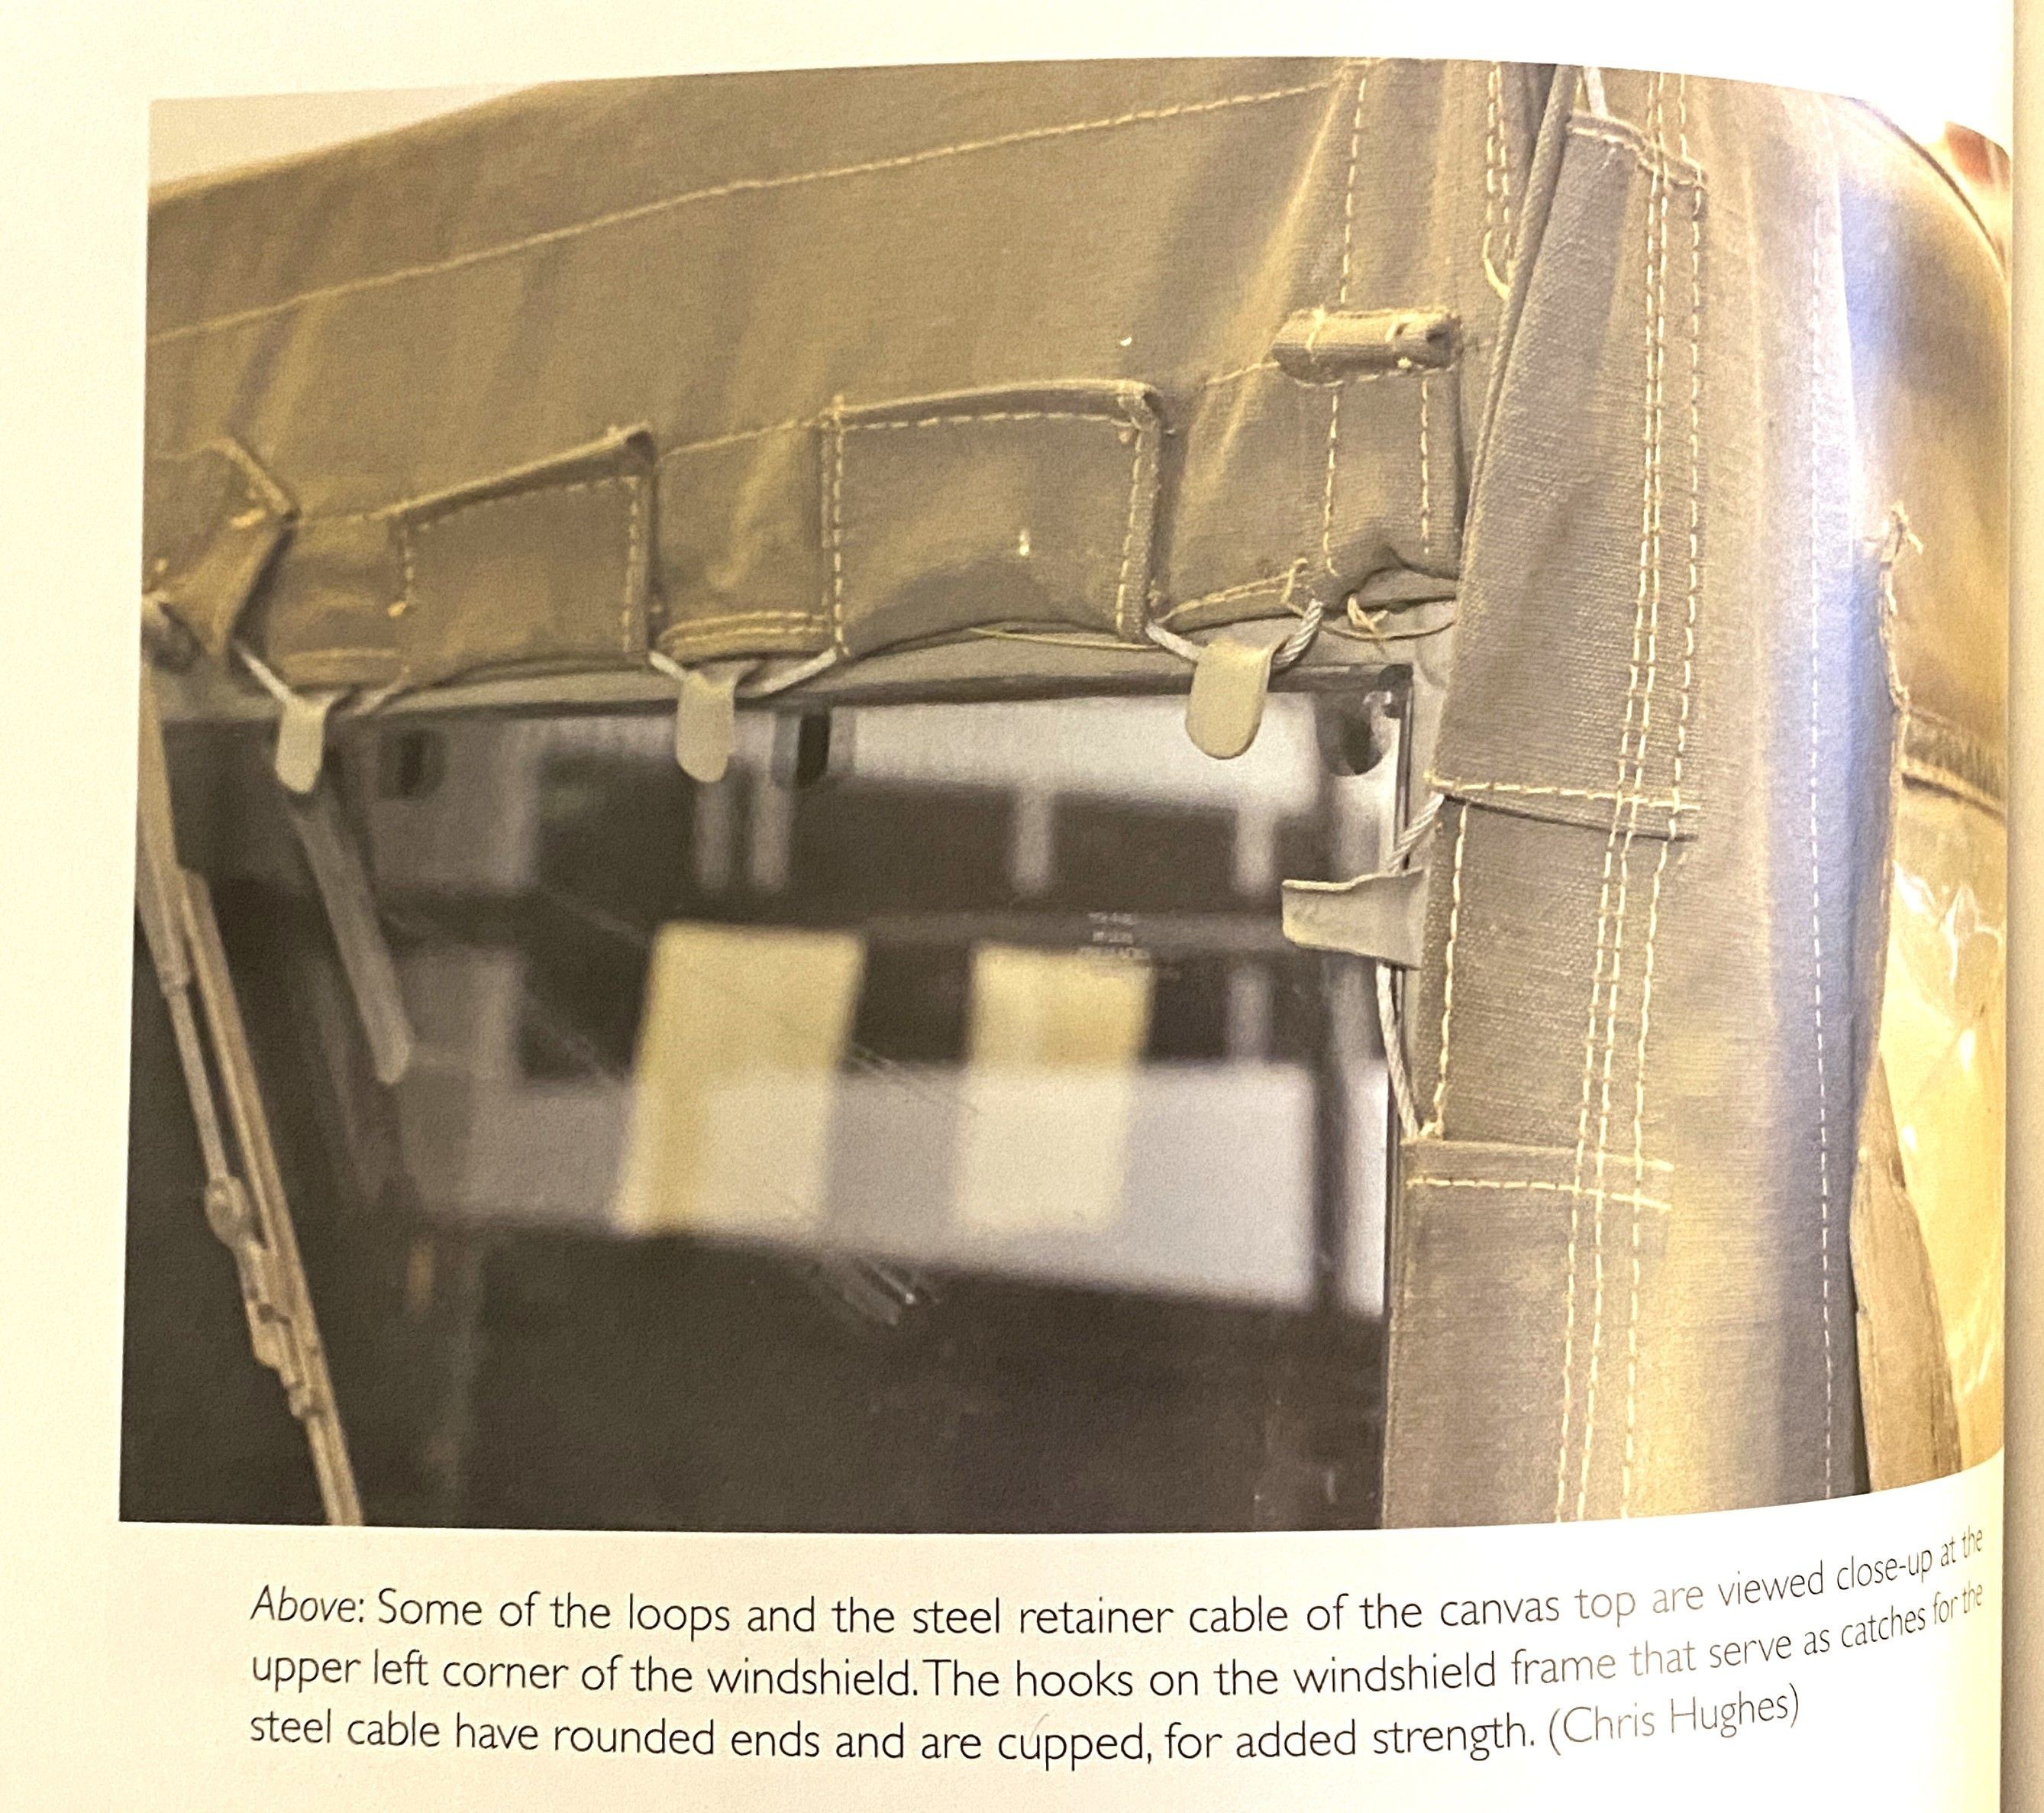 p. 62 showing the loops and steel retainer cable for the canvas top.